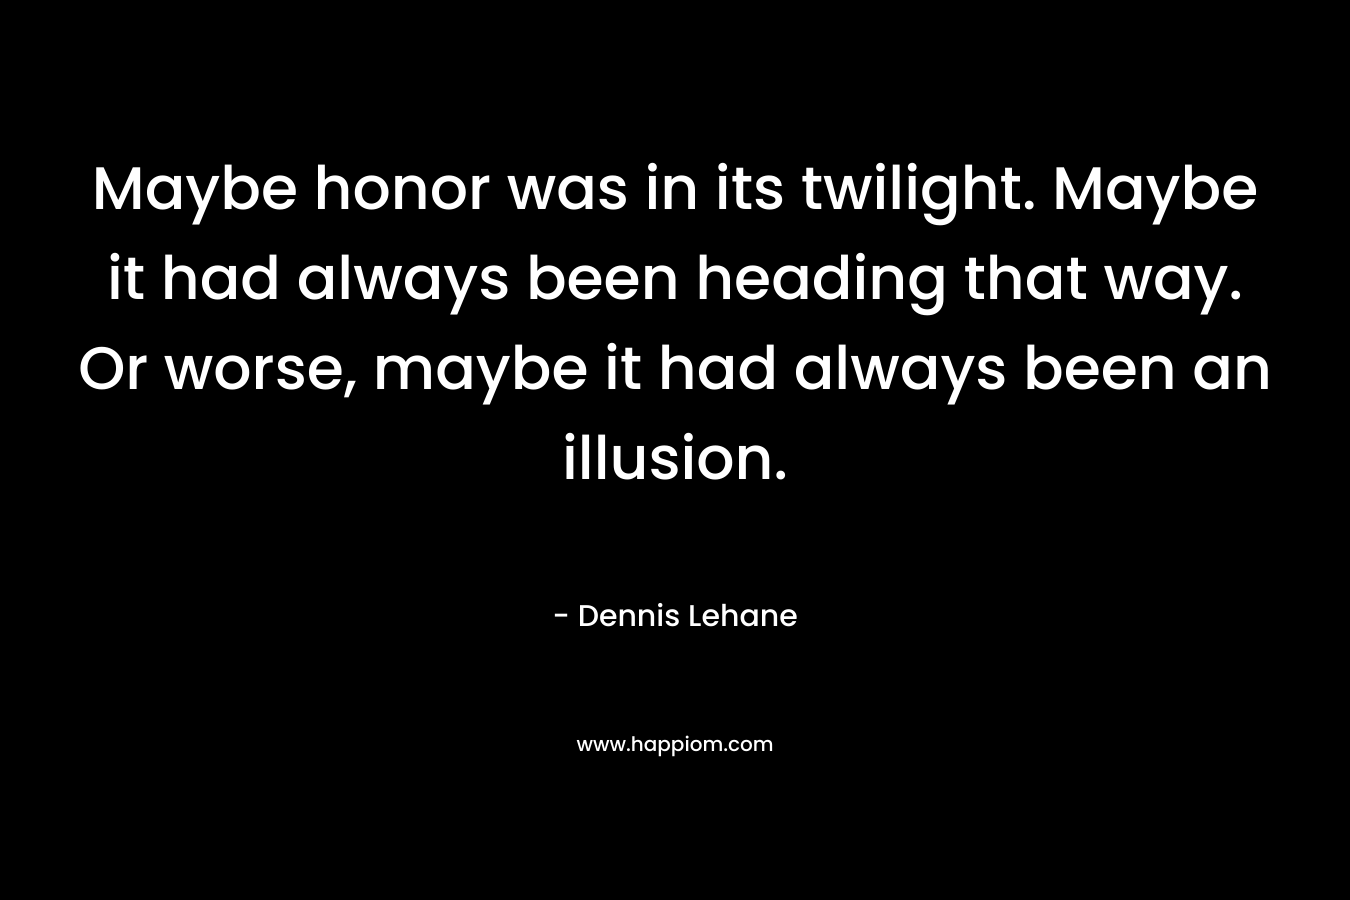 Maybe honor was in its twilight. Maybe it had always been heading that way. Or worse, maybe it had always been an illusion.